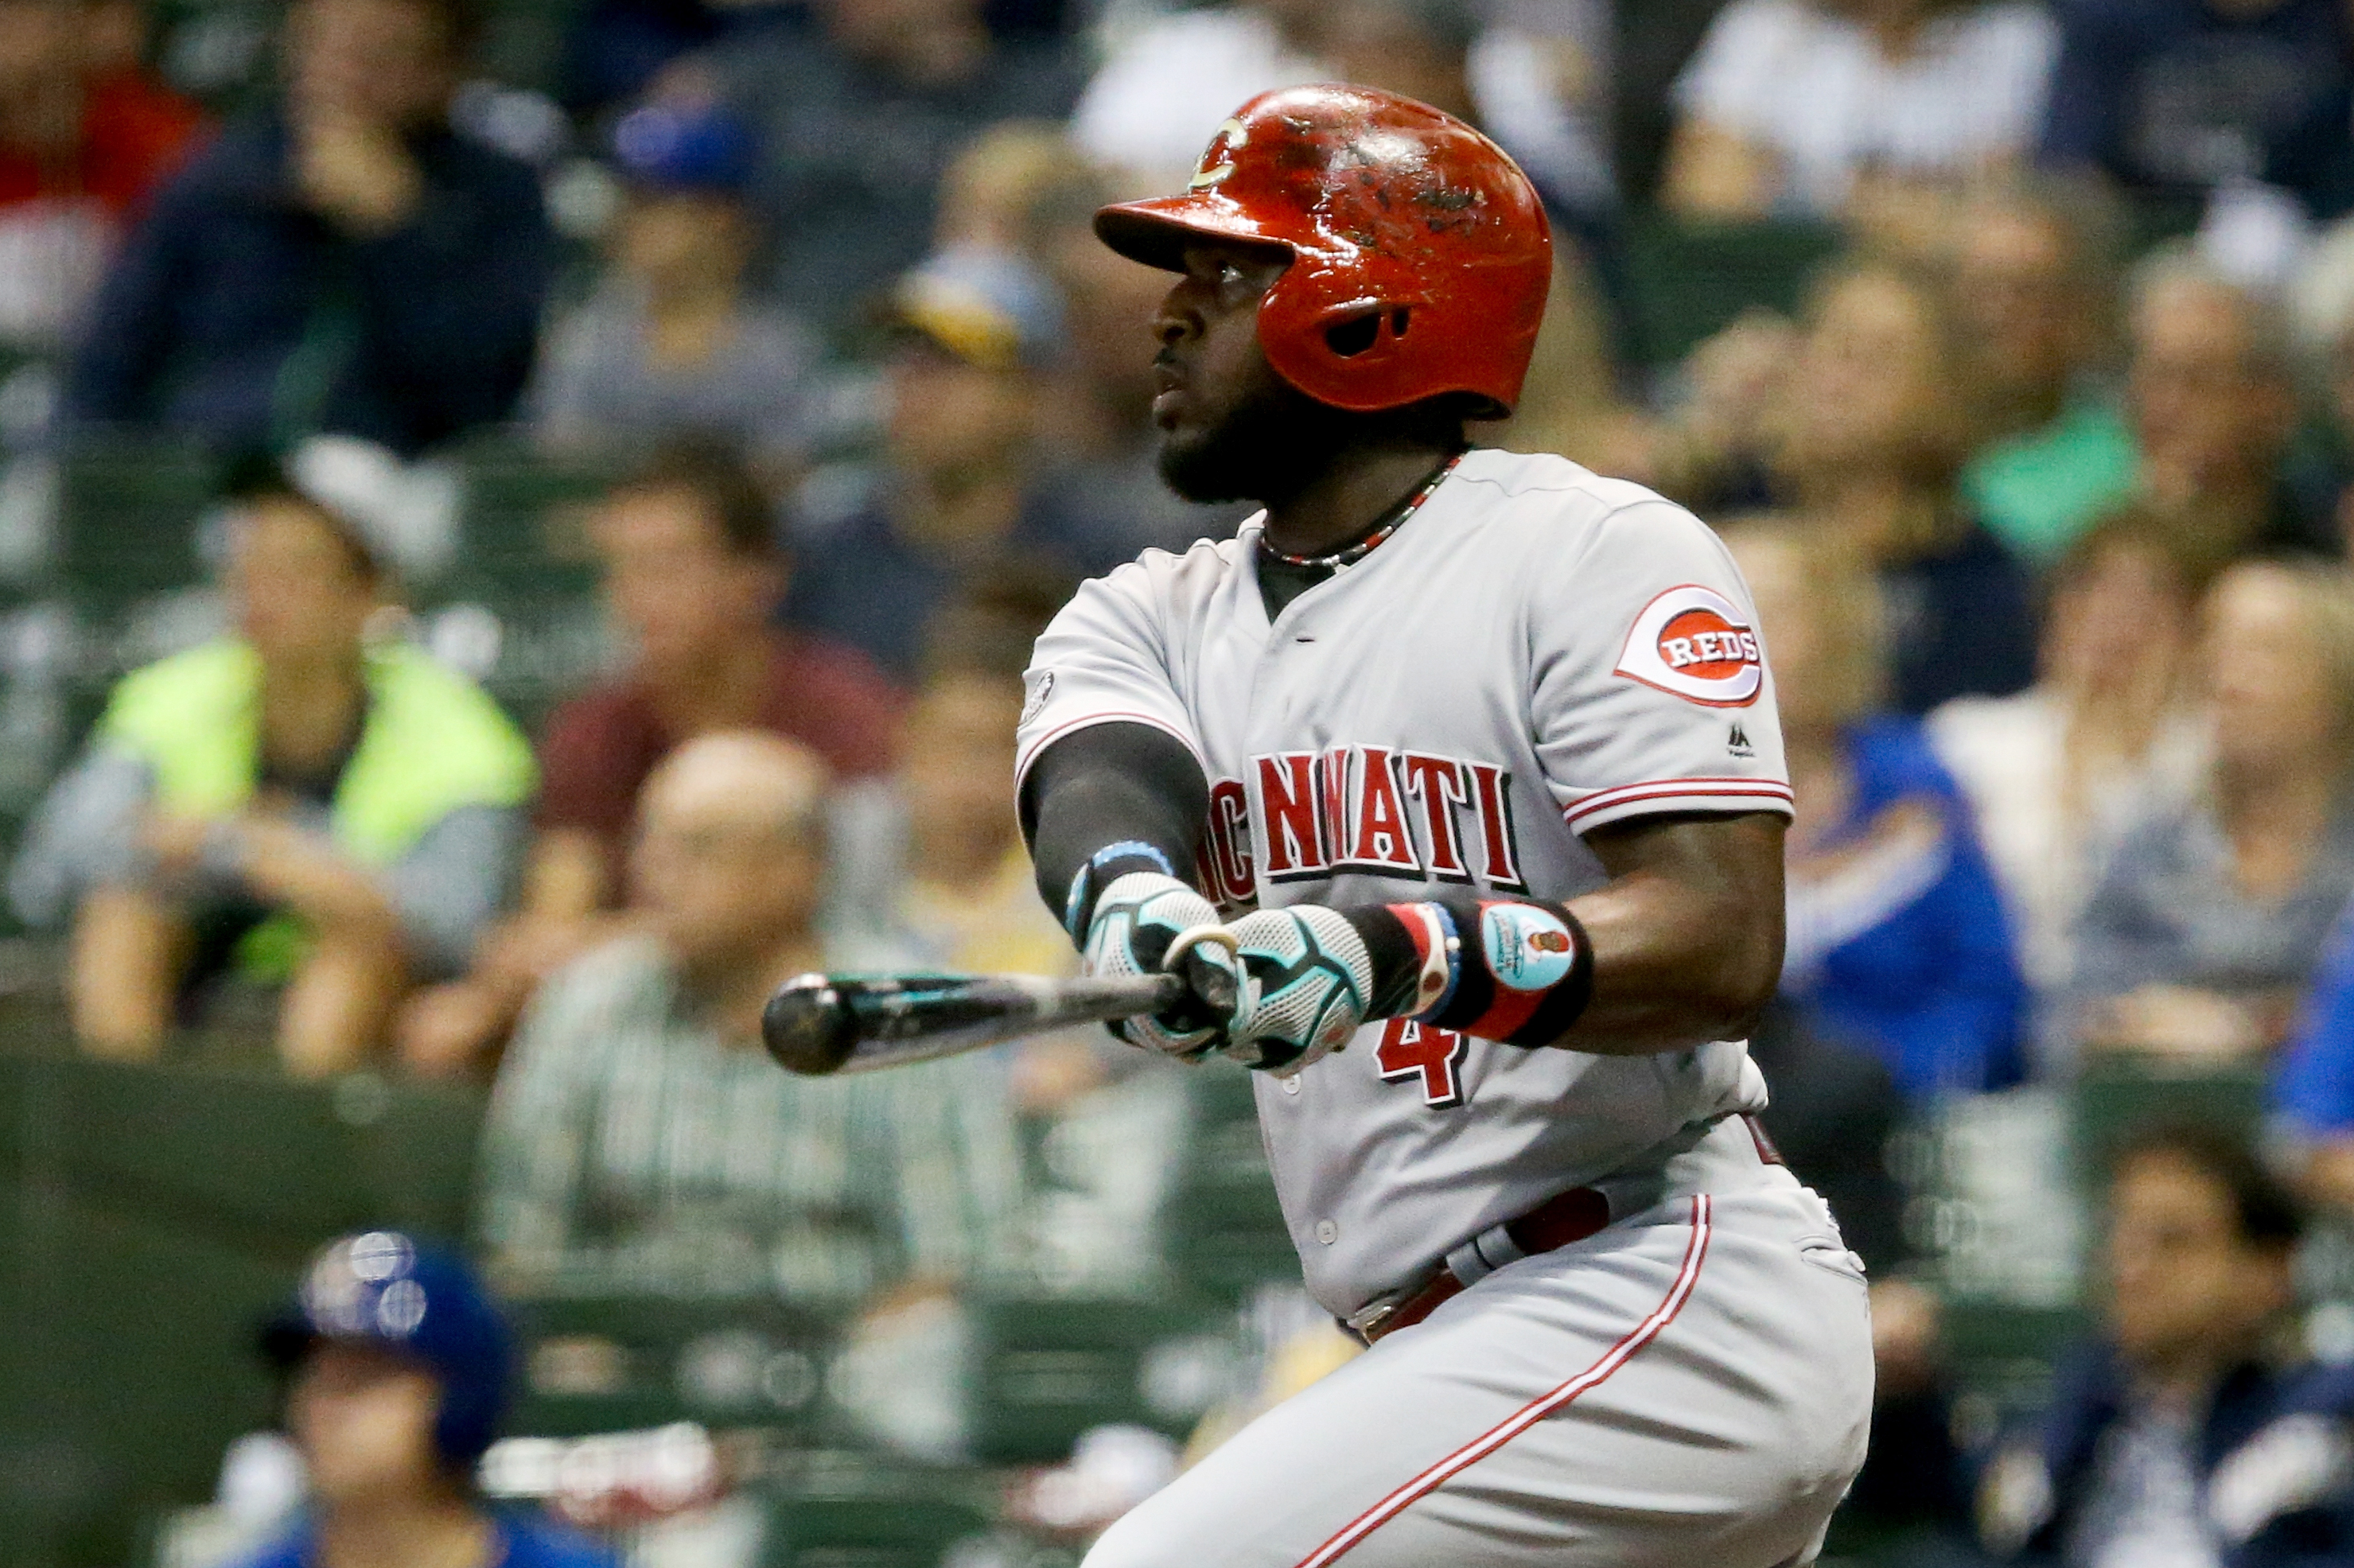 Brandon Phillips excited to be playing for hometown Braves